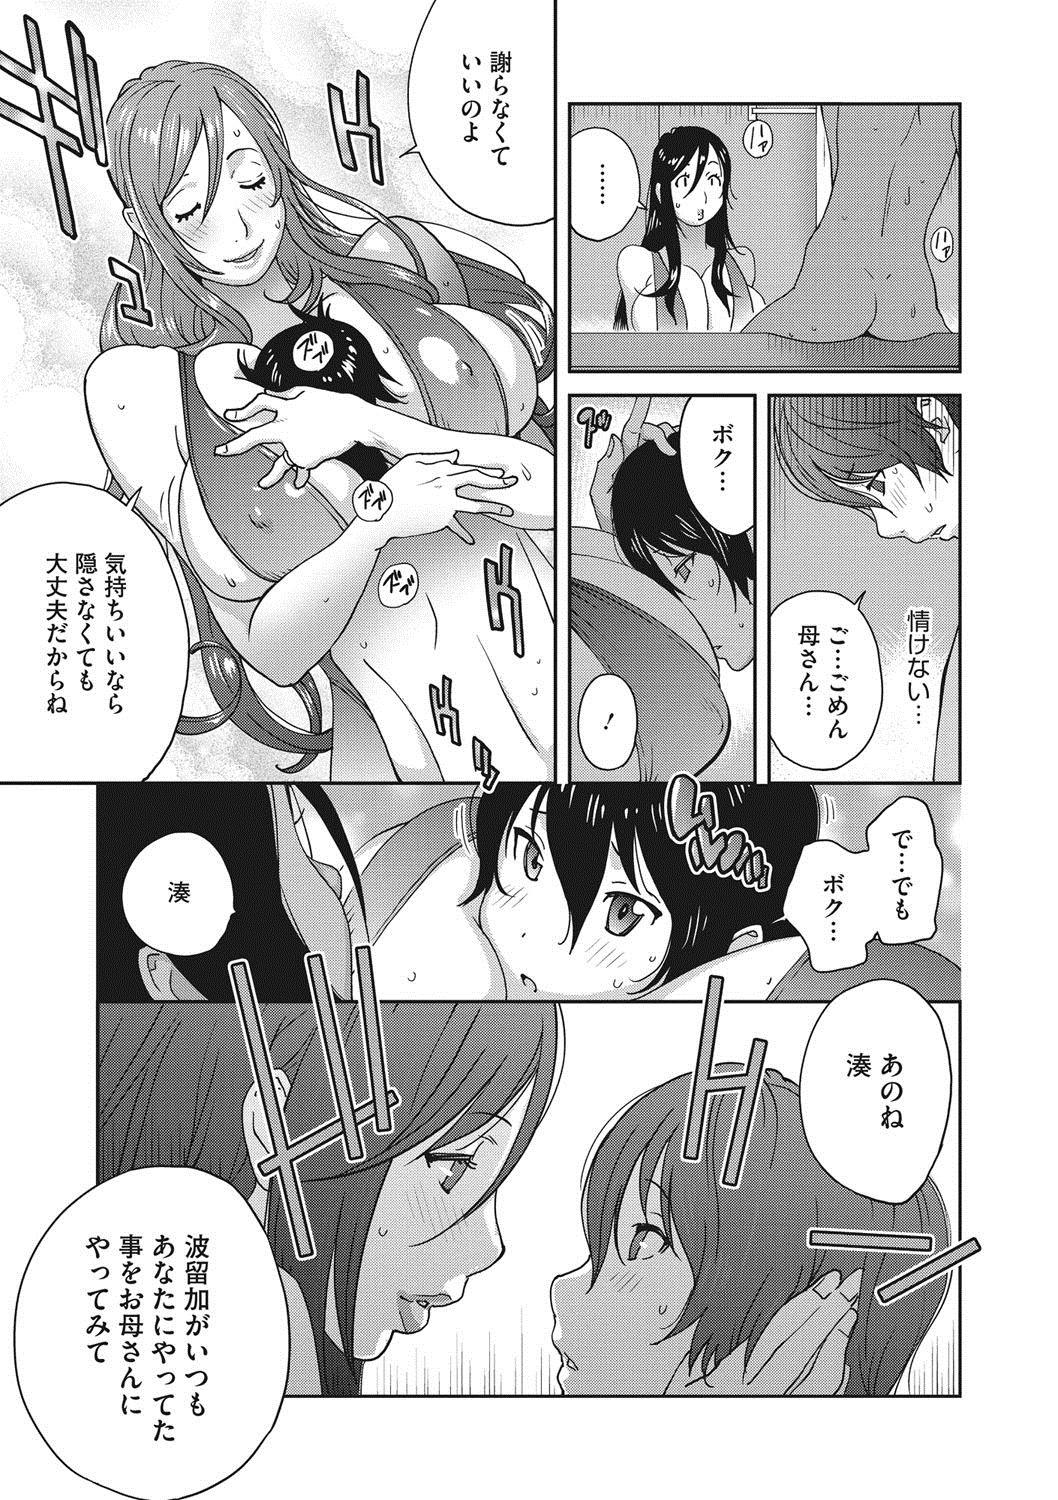 [Kotoyoshi Yumisuke] Haha to Ane to Aoi Ichigo no Fromage - Fromage of mother and an older sister and a blue strawberry Ch. 1-3 28